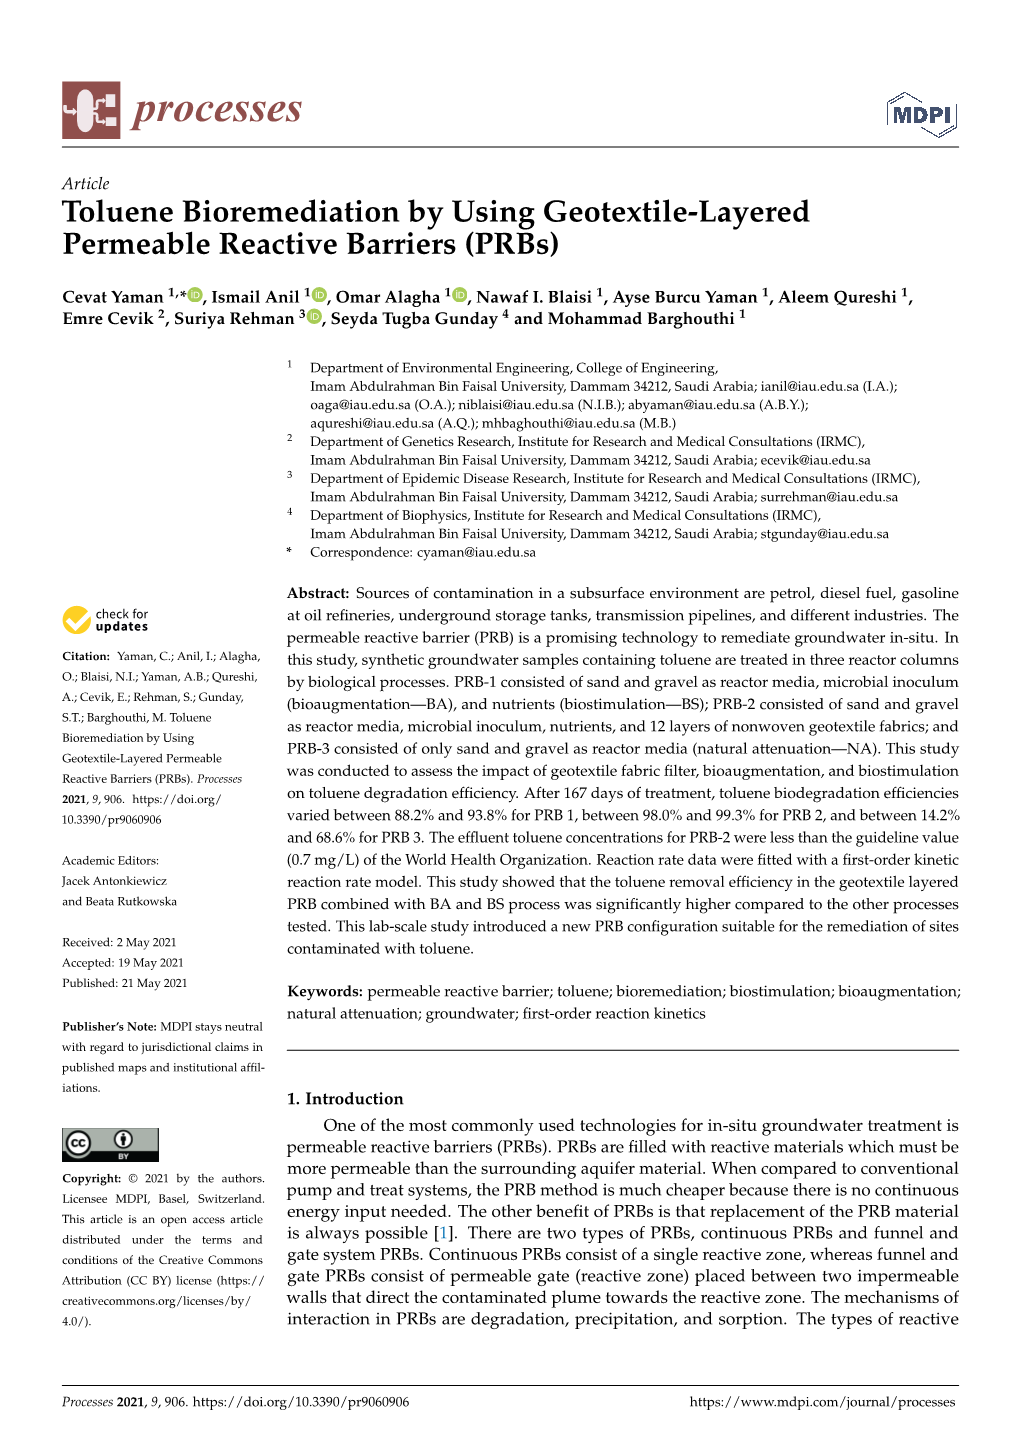 Toluene Bioremediation by Using Geotextile-Layered Permeable Reactive Barriers (Prbs)